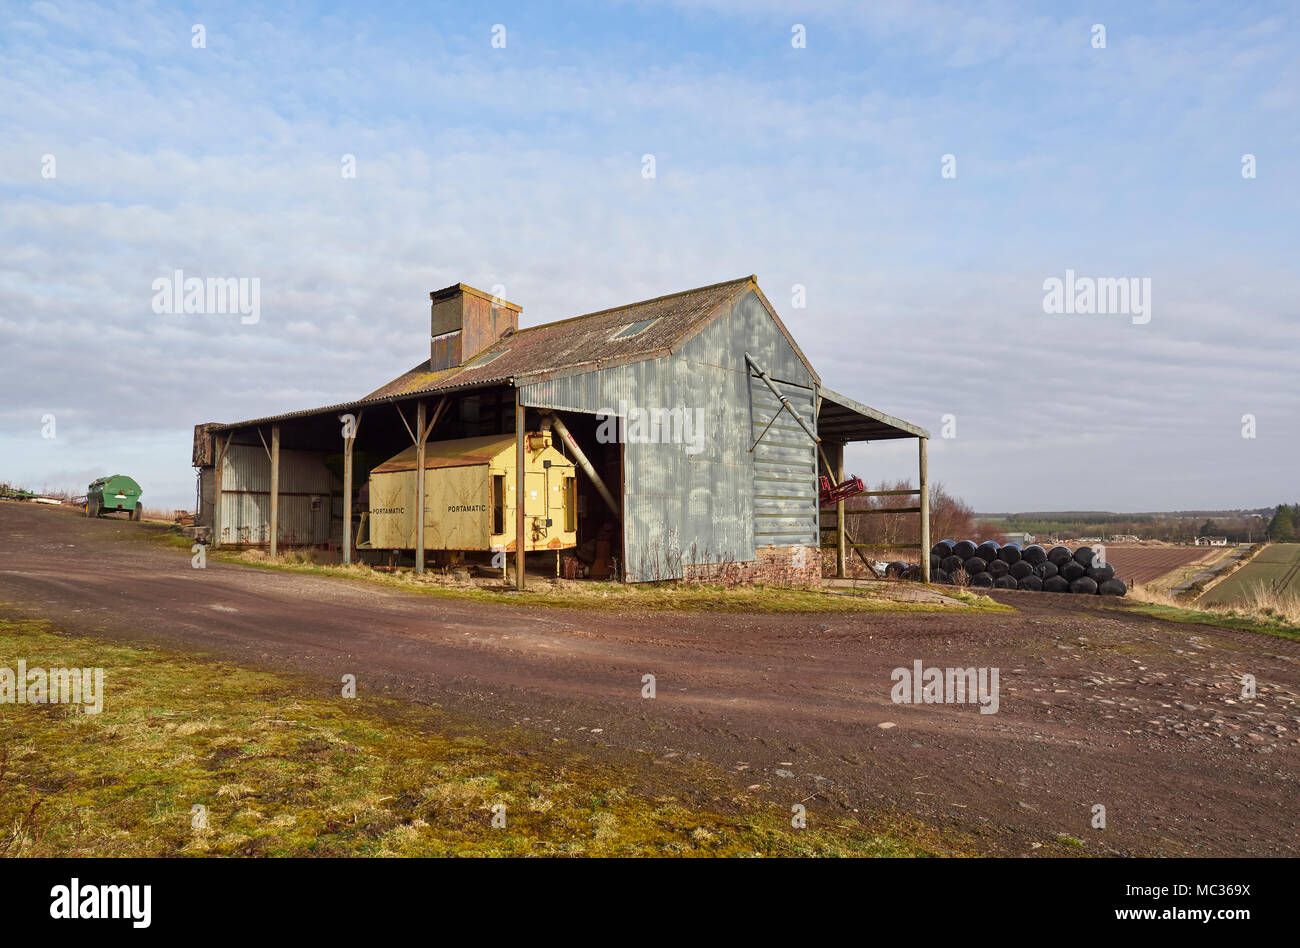 An Old long abandoned Portamatic Grain Dryer stored within an Old Corrugated sheet clad Barn on a Farm near Dubton, Angus in Scotland. Stock Photo